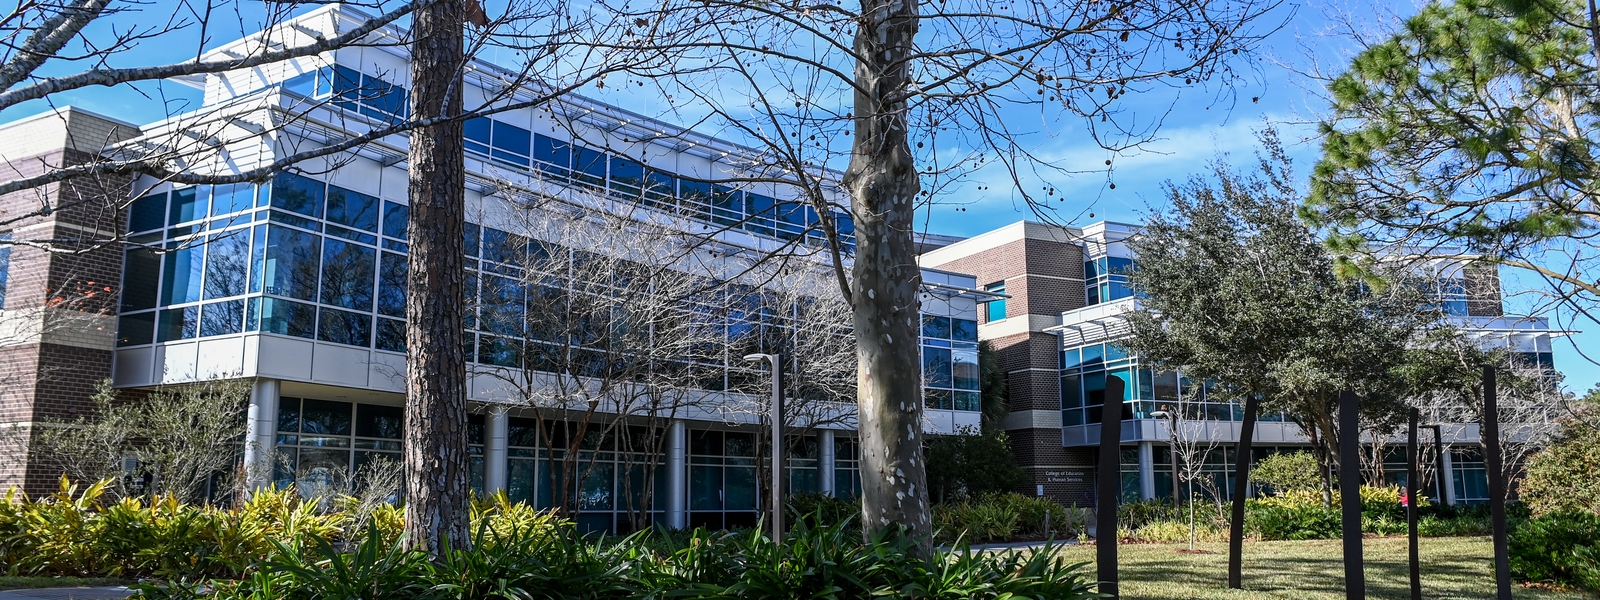 UNF College of Education building on campus